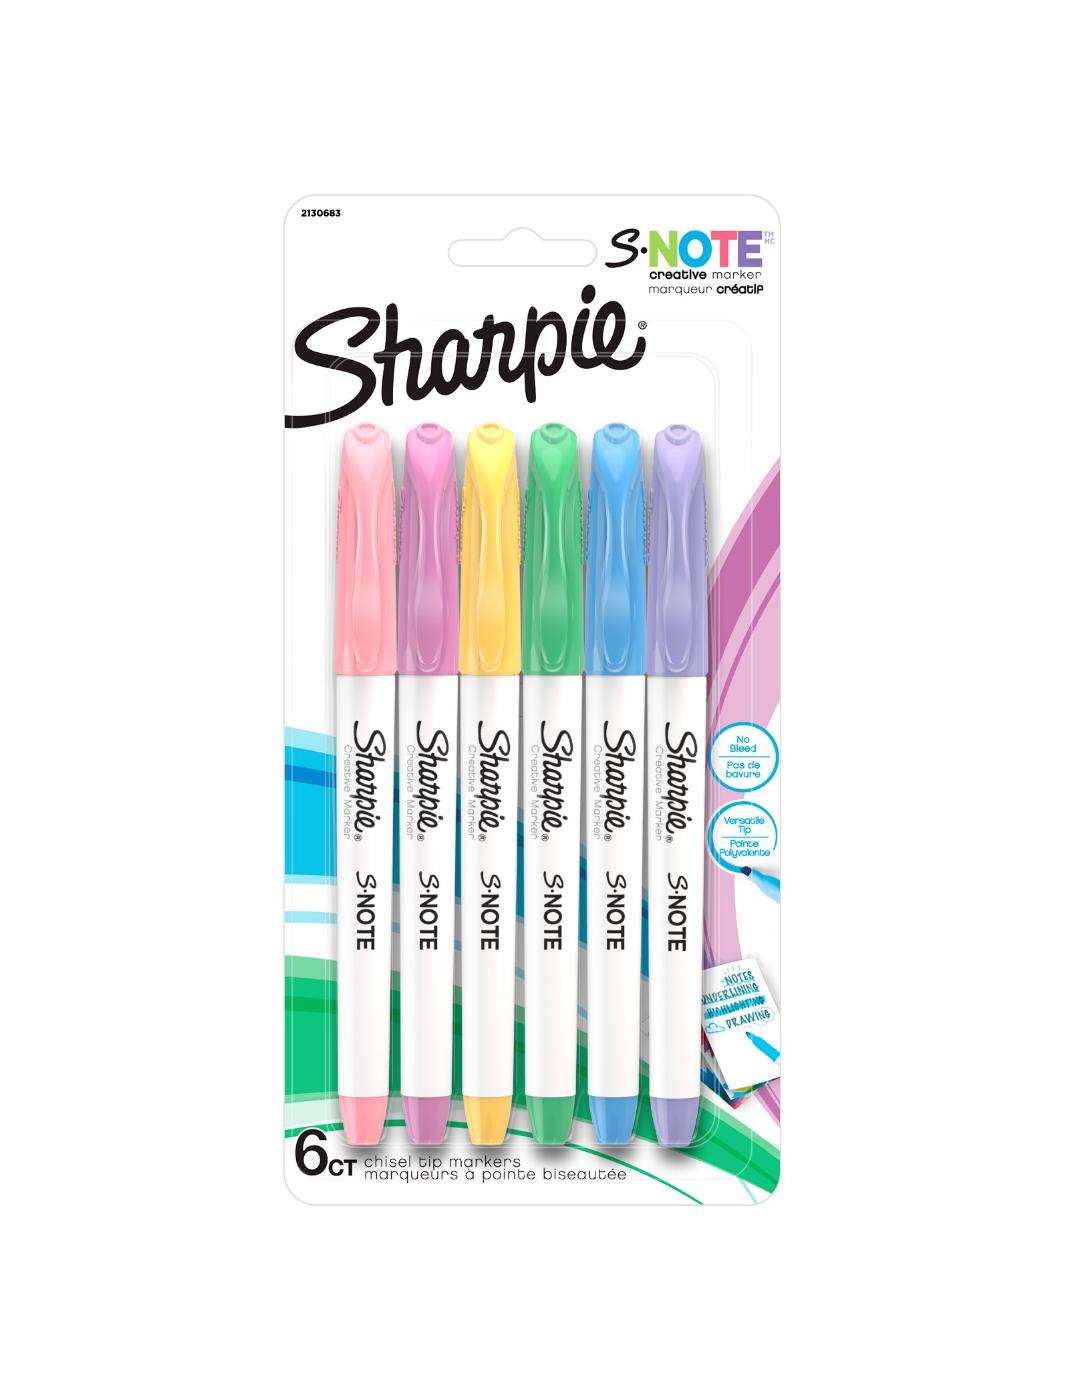 Sharpie S-Note Chisel Tip Creative Markers - Assorted Ink